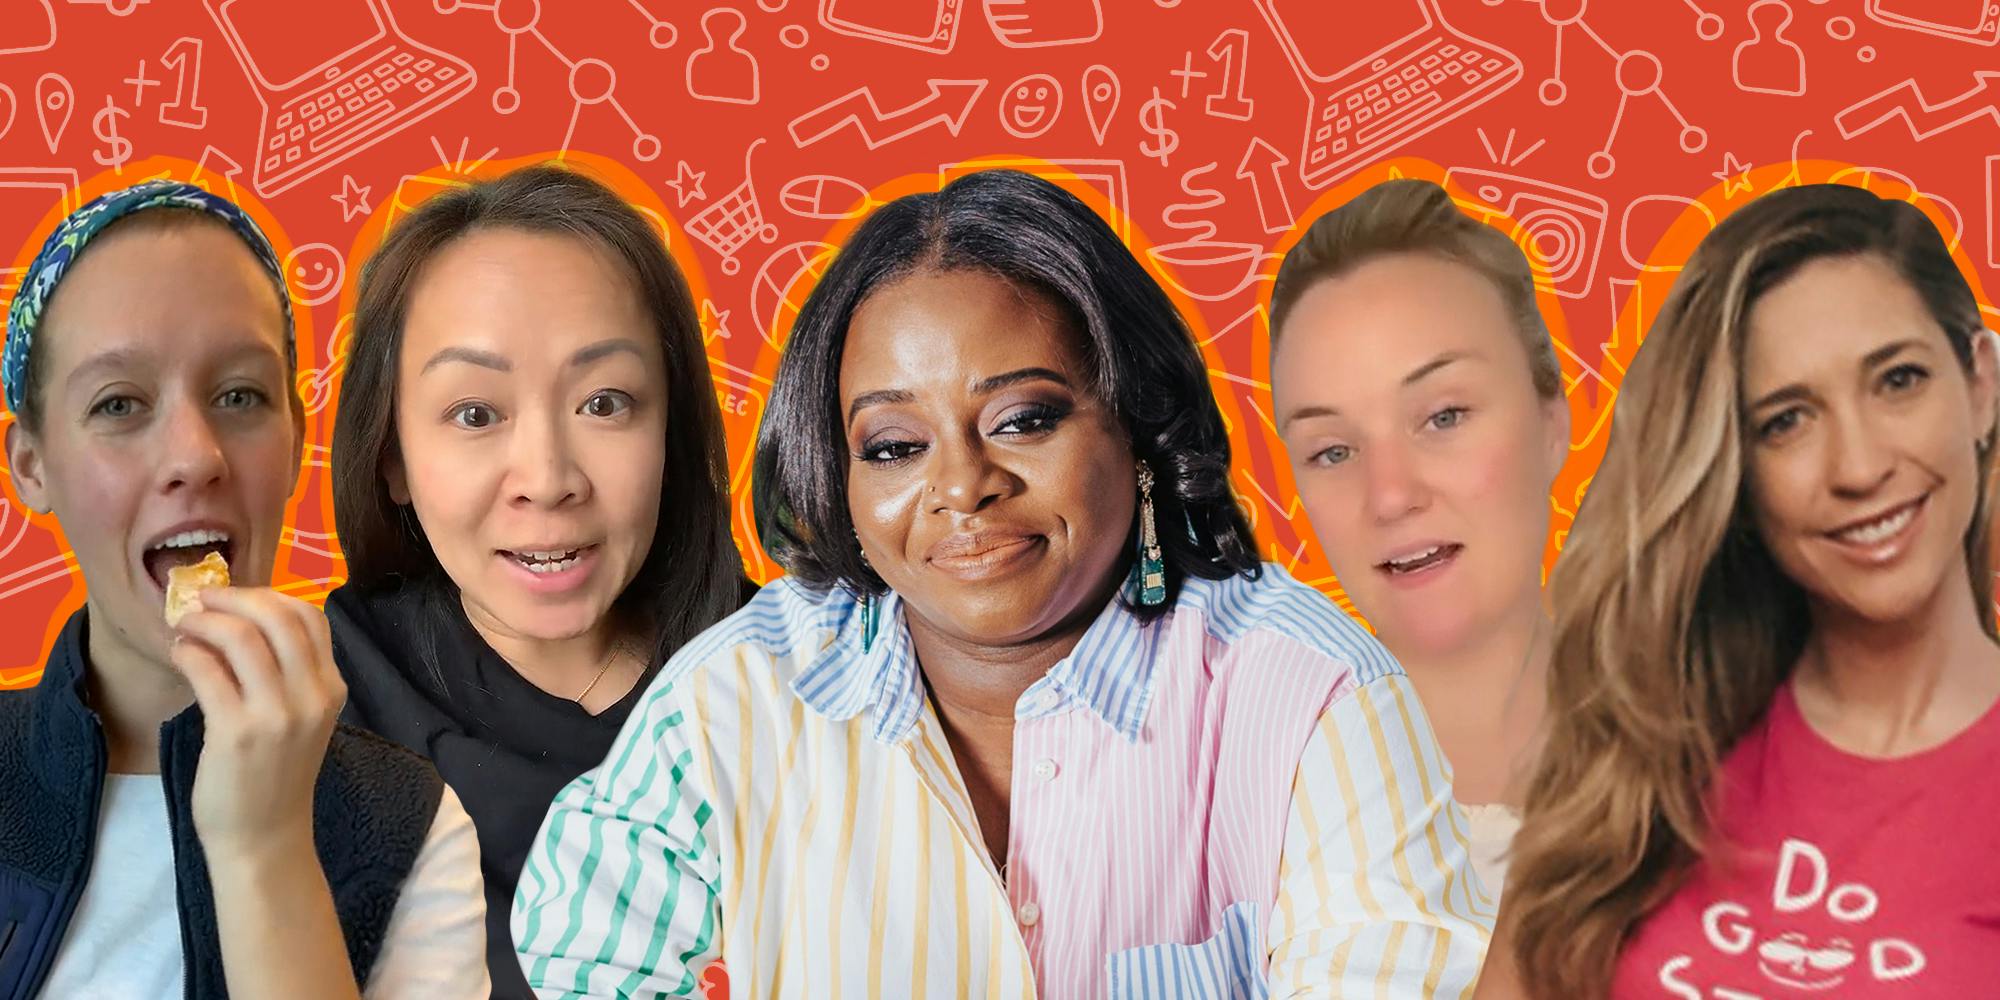 @plantedinthekitchen, @momcomnyc, Camile Wilson, @stephanieoq, and Cynthia Johnson in front of red social media icons background Passionfruit Remix